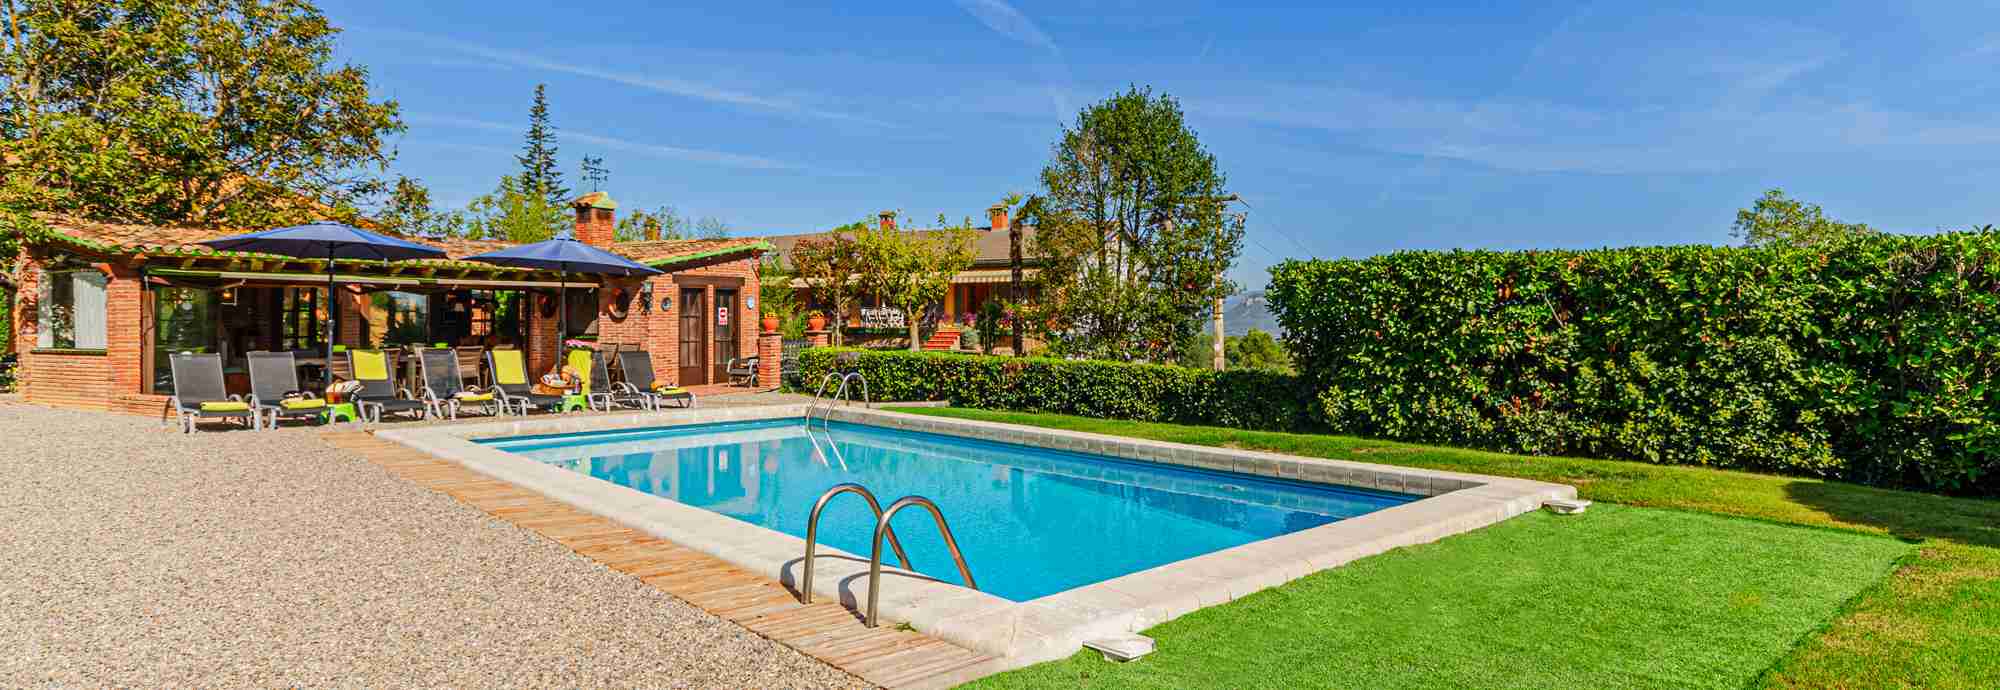 Resort style private villa with stunning pool house close to Barcelona 